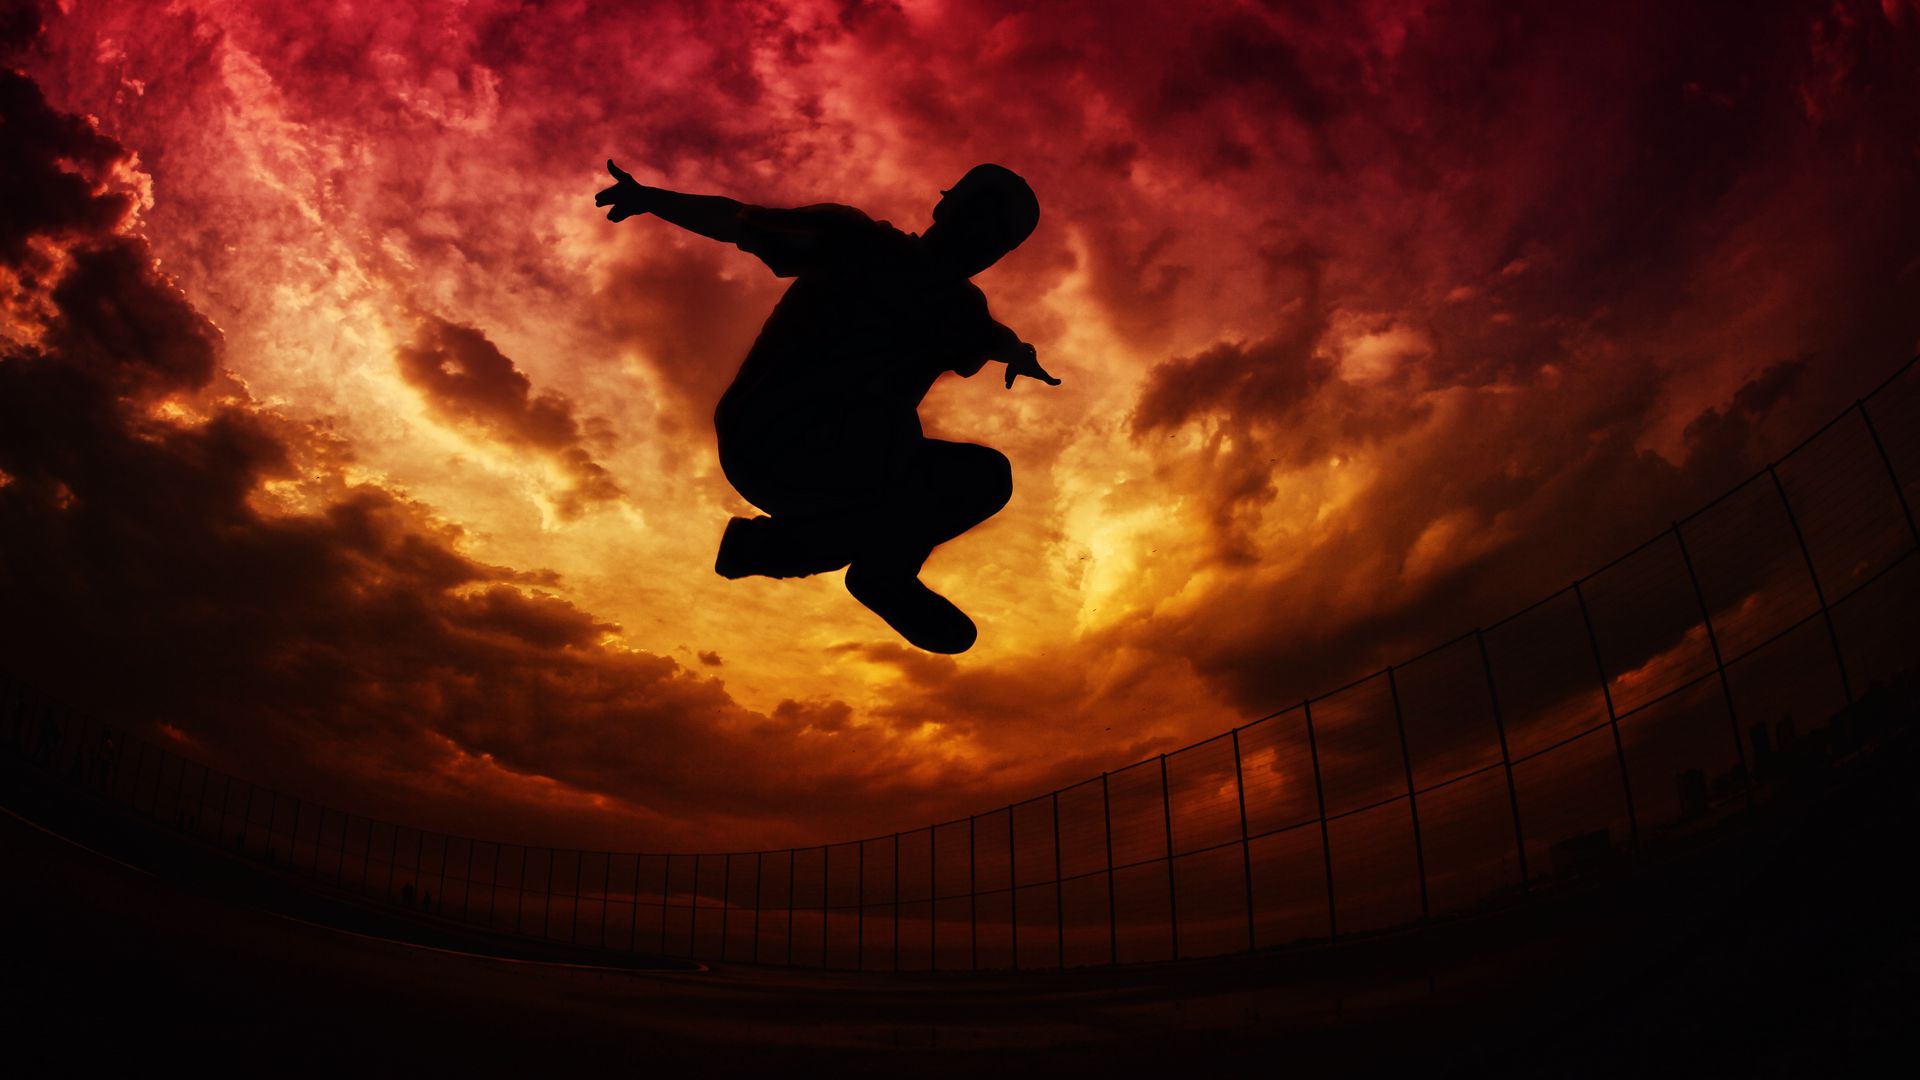 Download wallpaper 1920x1080 parkour, silhouette, jump, sky, clouds, fence  full hd, hdtv, fhd, 1080p hd background